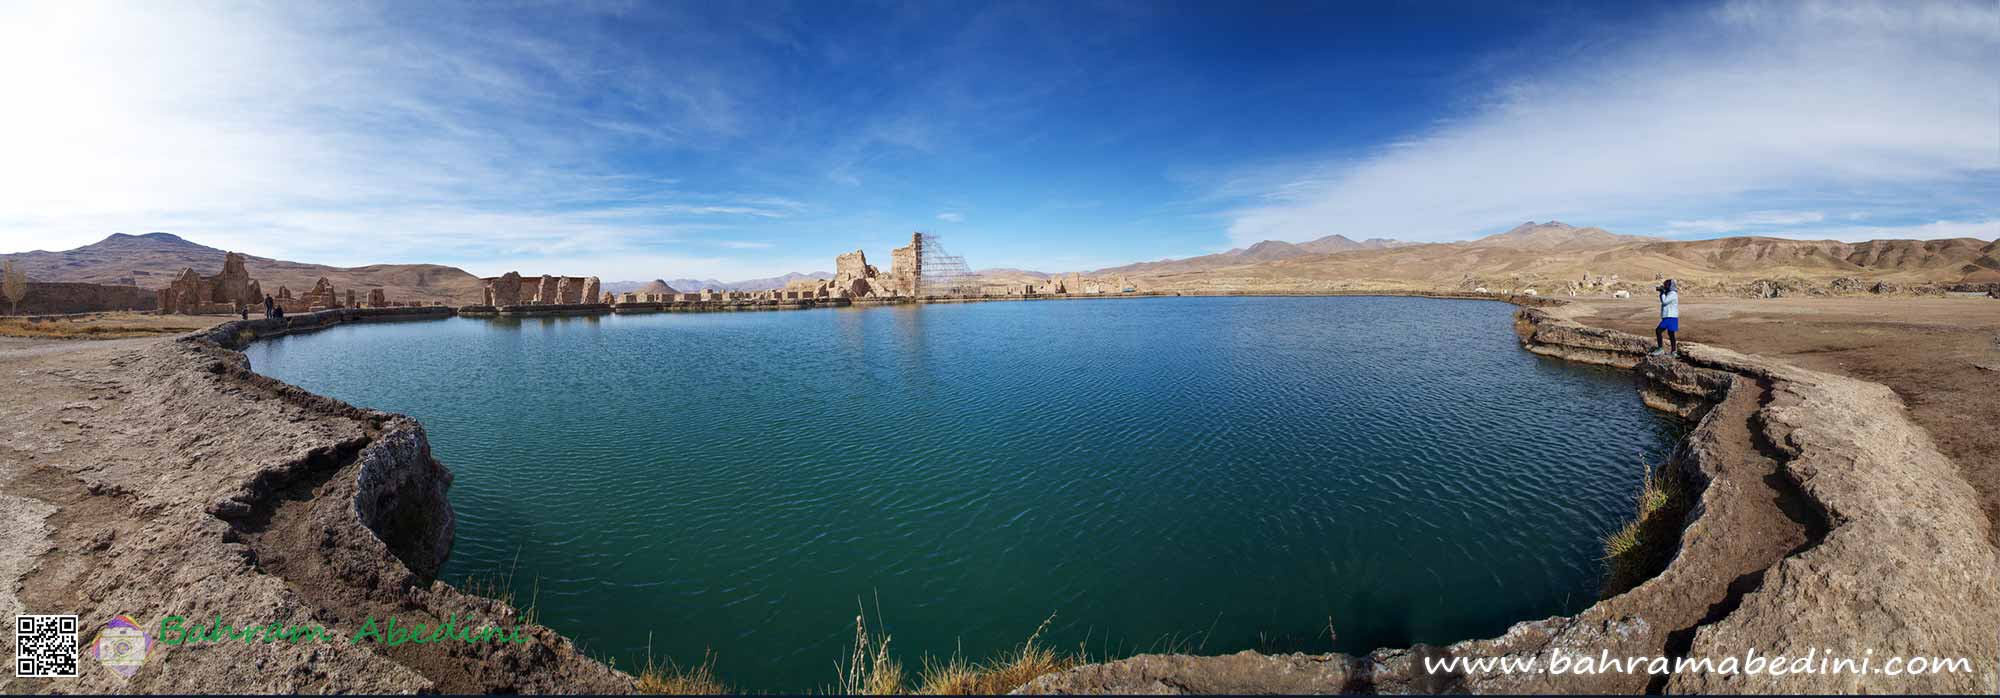 Takht Soleiman lake and ruins